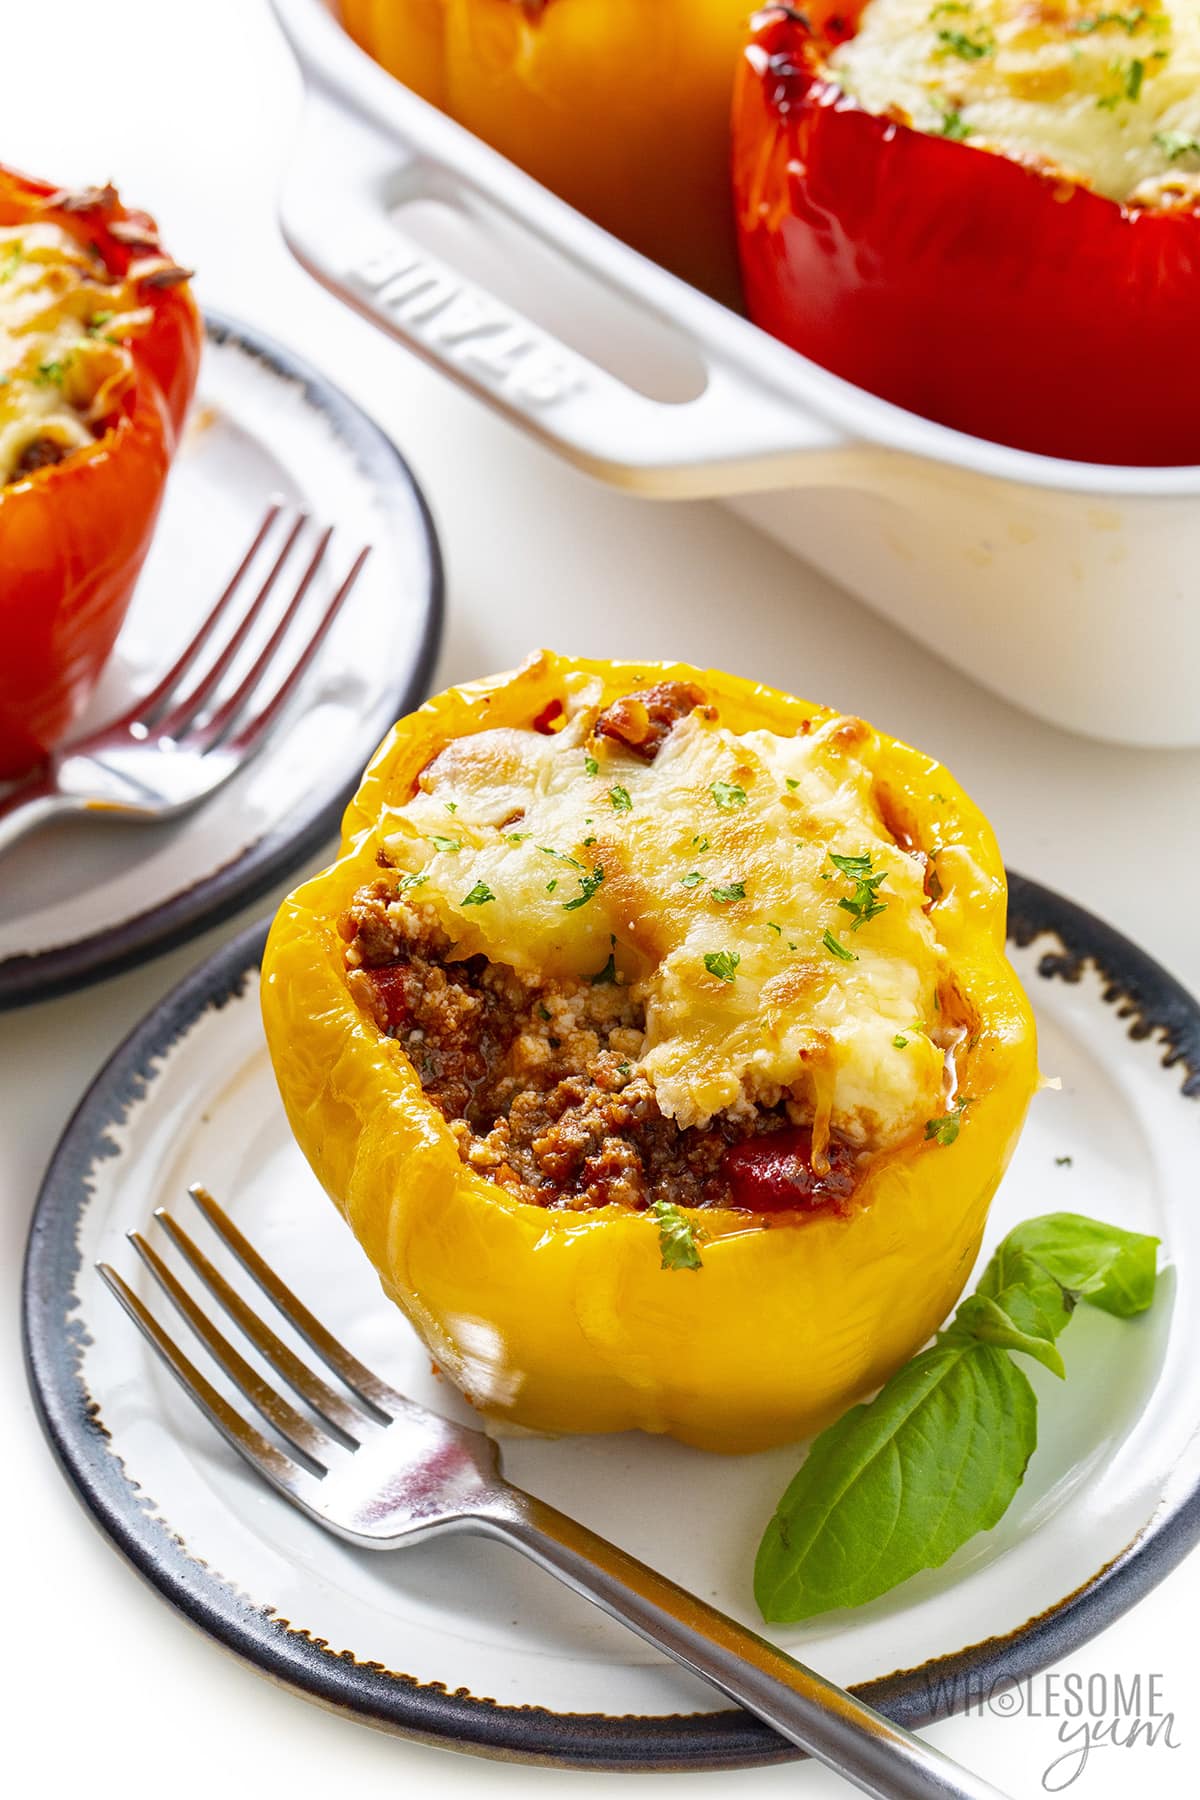 Low-carb stuffed peppers garnished with basil.